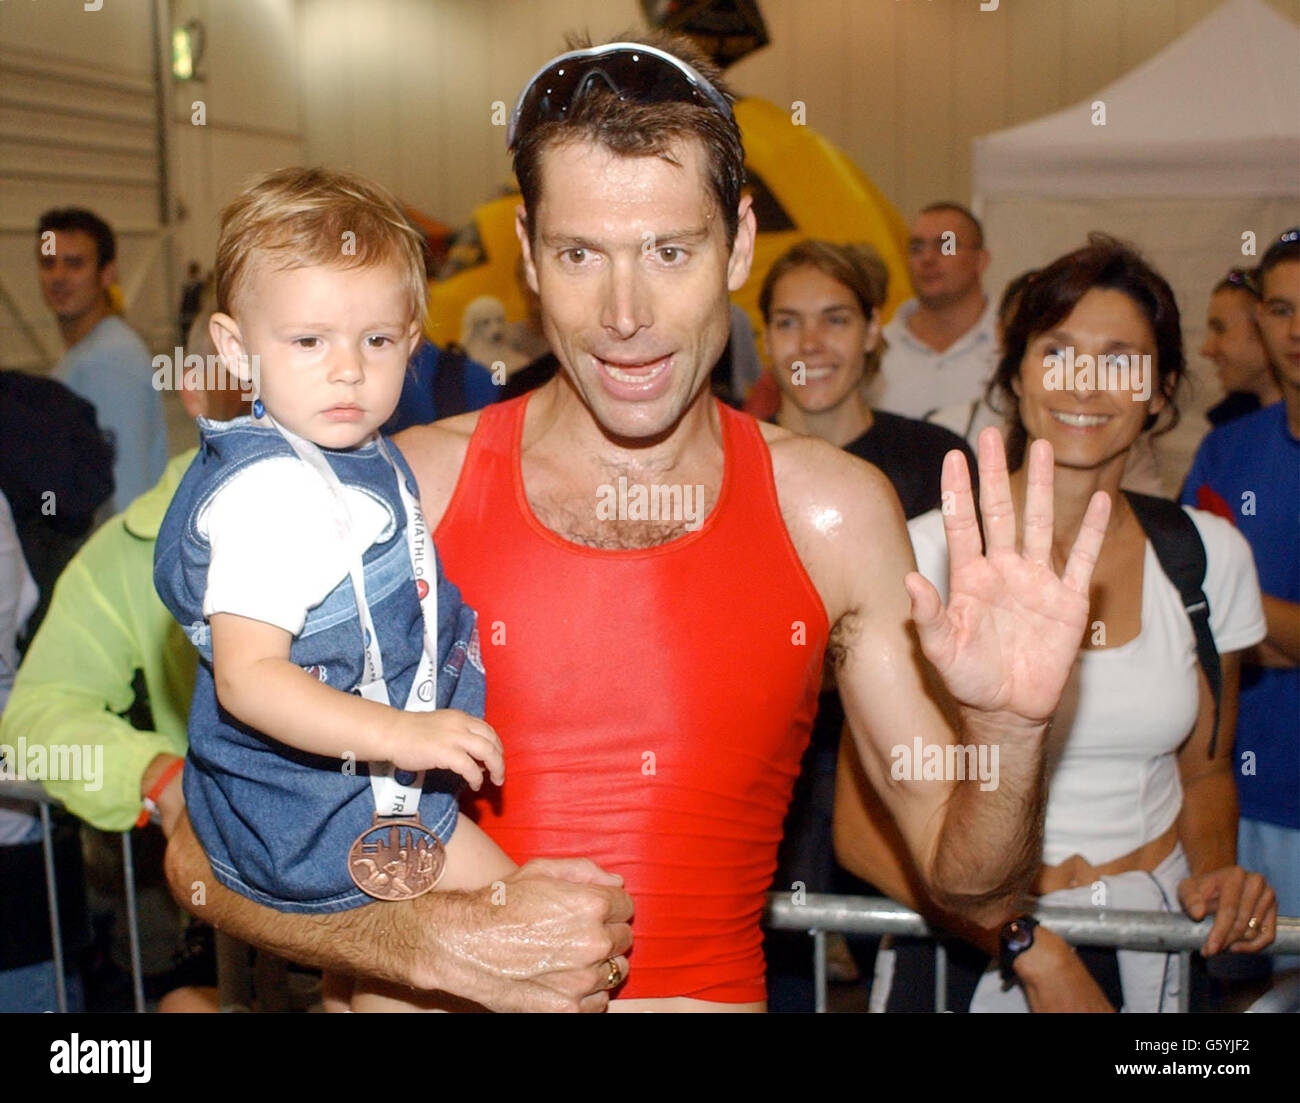 Mens Elite champion Simon Lessing of England and his baby wave to fans while his wife (right behind) looks on during the London Triathlon at Royal Victoria Docks. Stock Photo